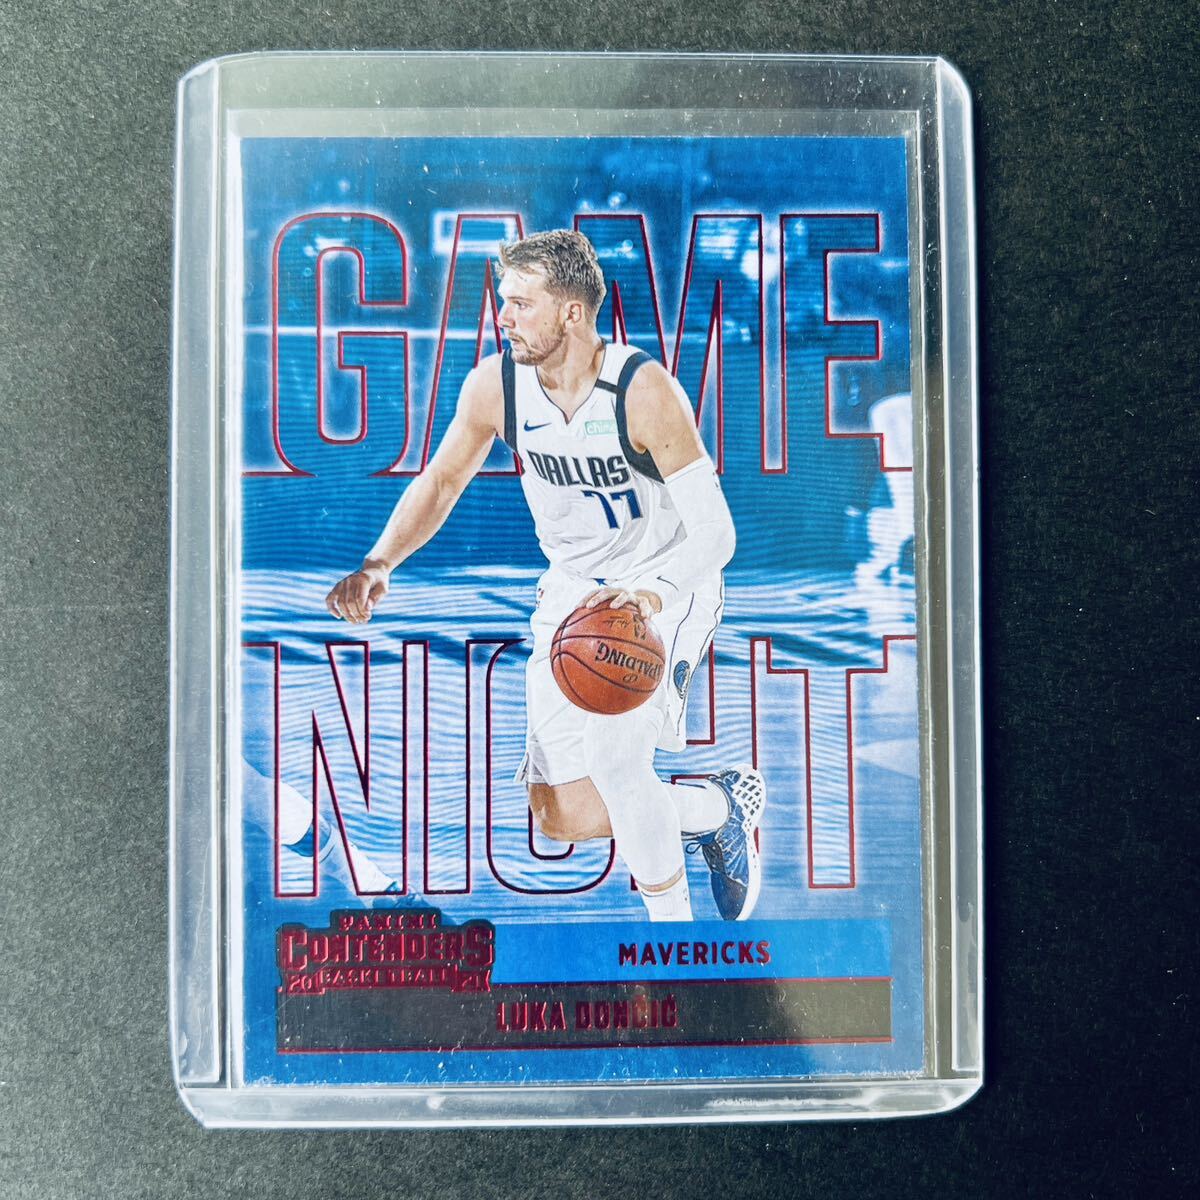 Panini NBAカード Luka Doncic 2020-21 contenders basketball GAME HIGH red parallel _画像1